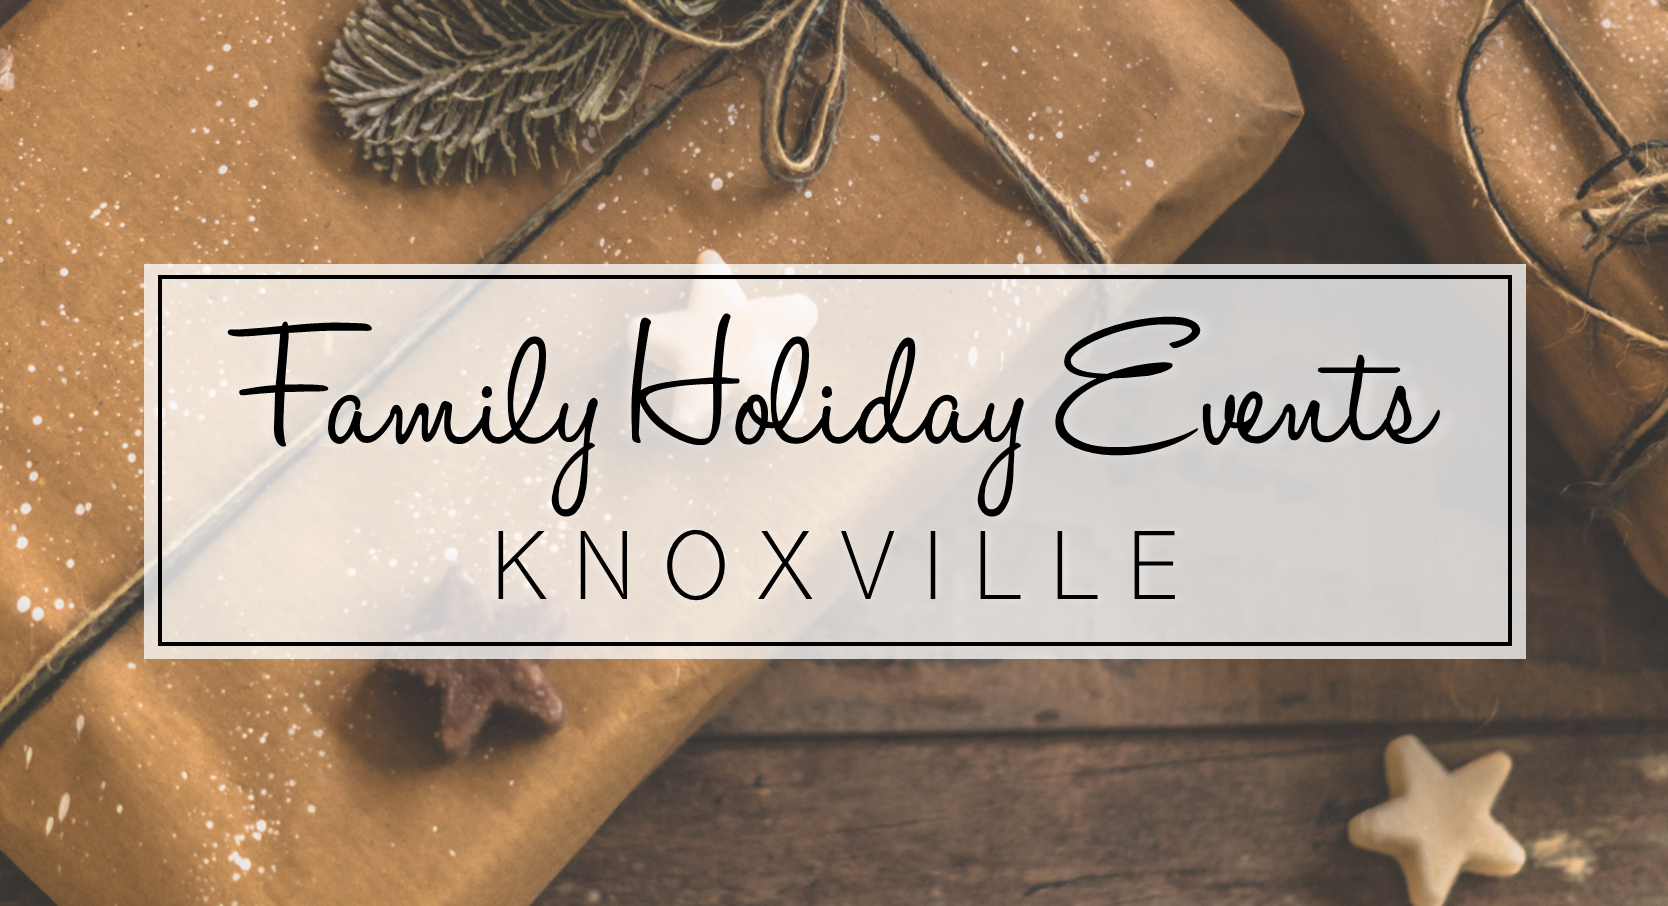 Knoxville Family Holiday Events